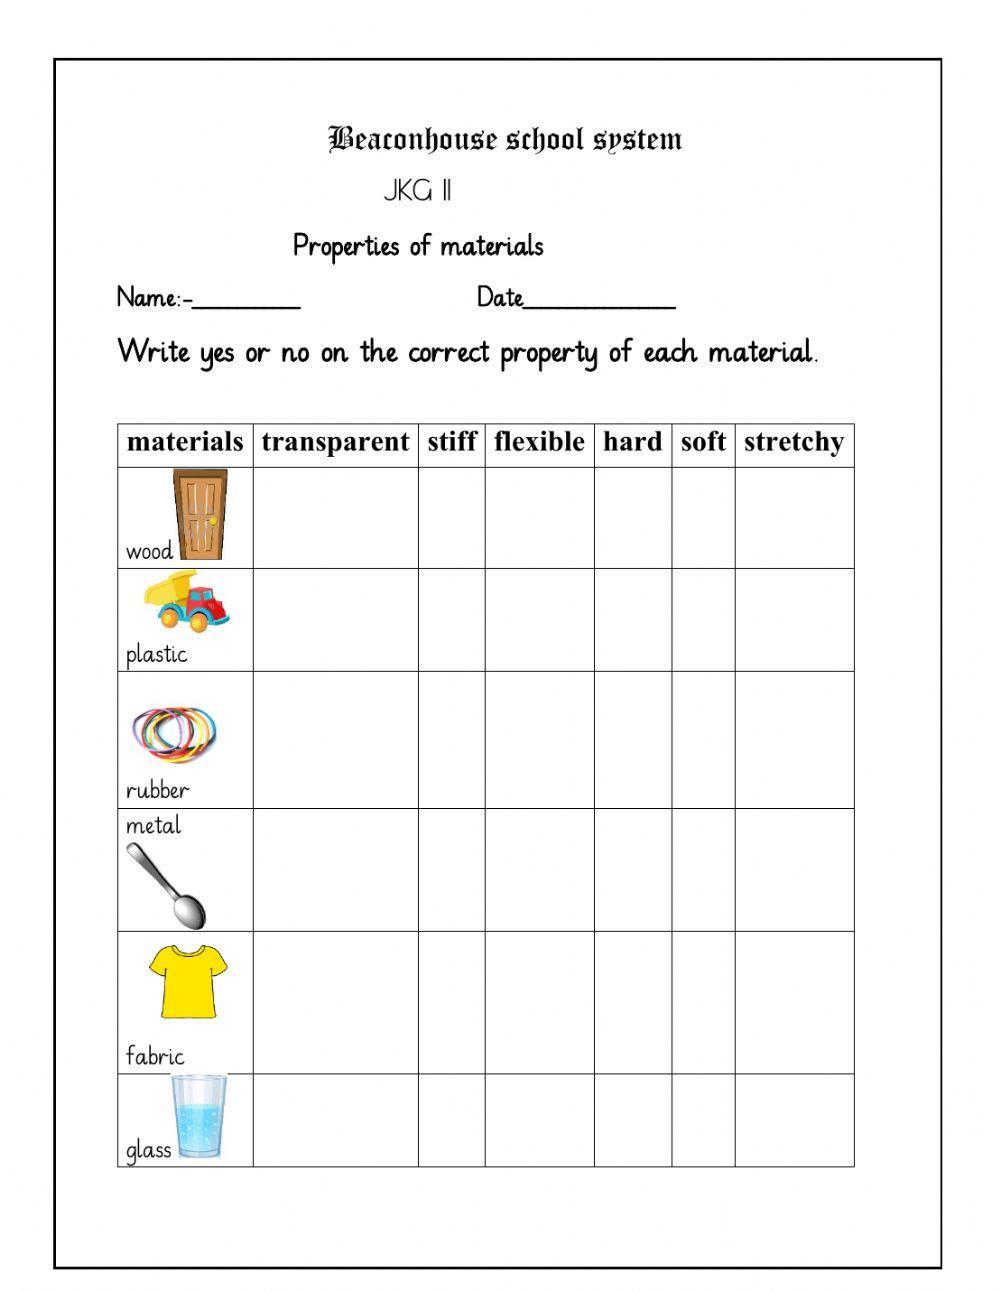 Materials and their properties KNU